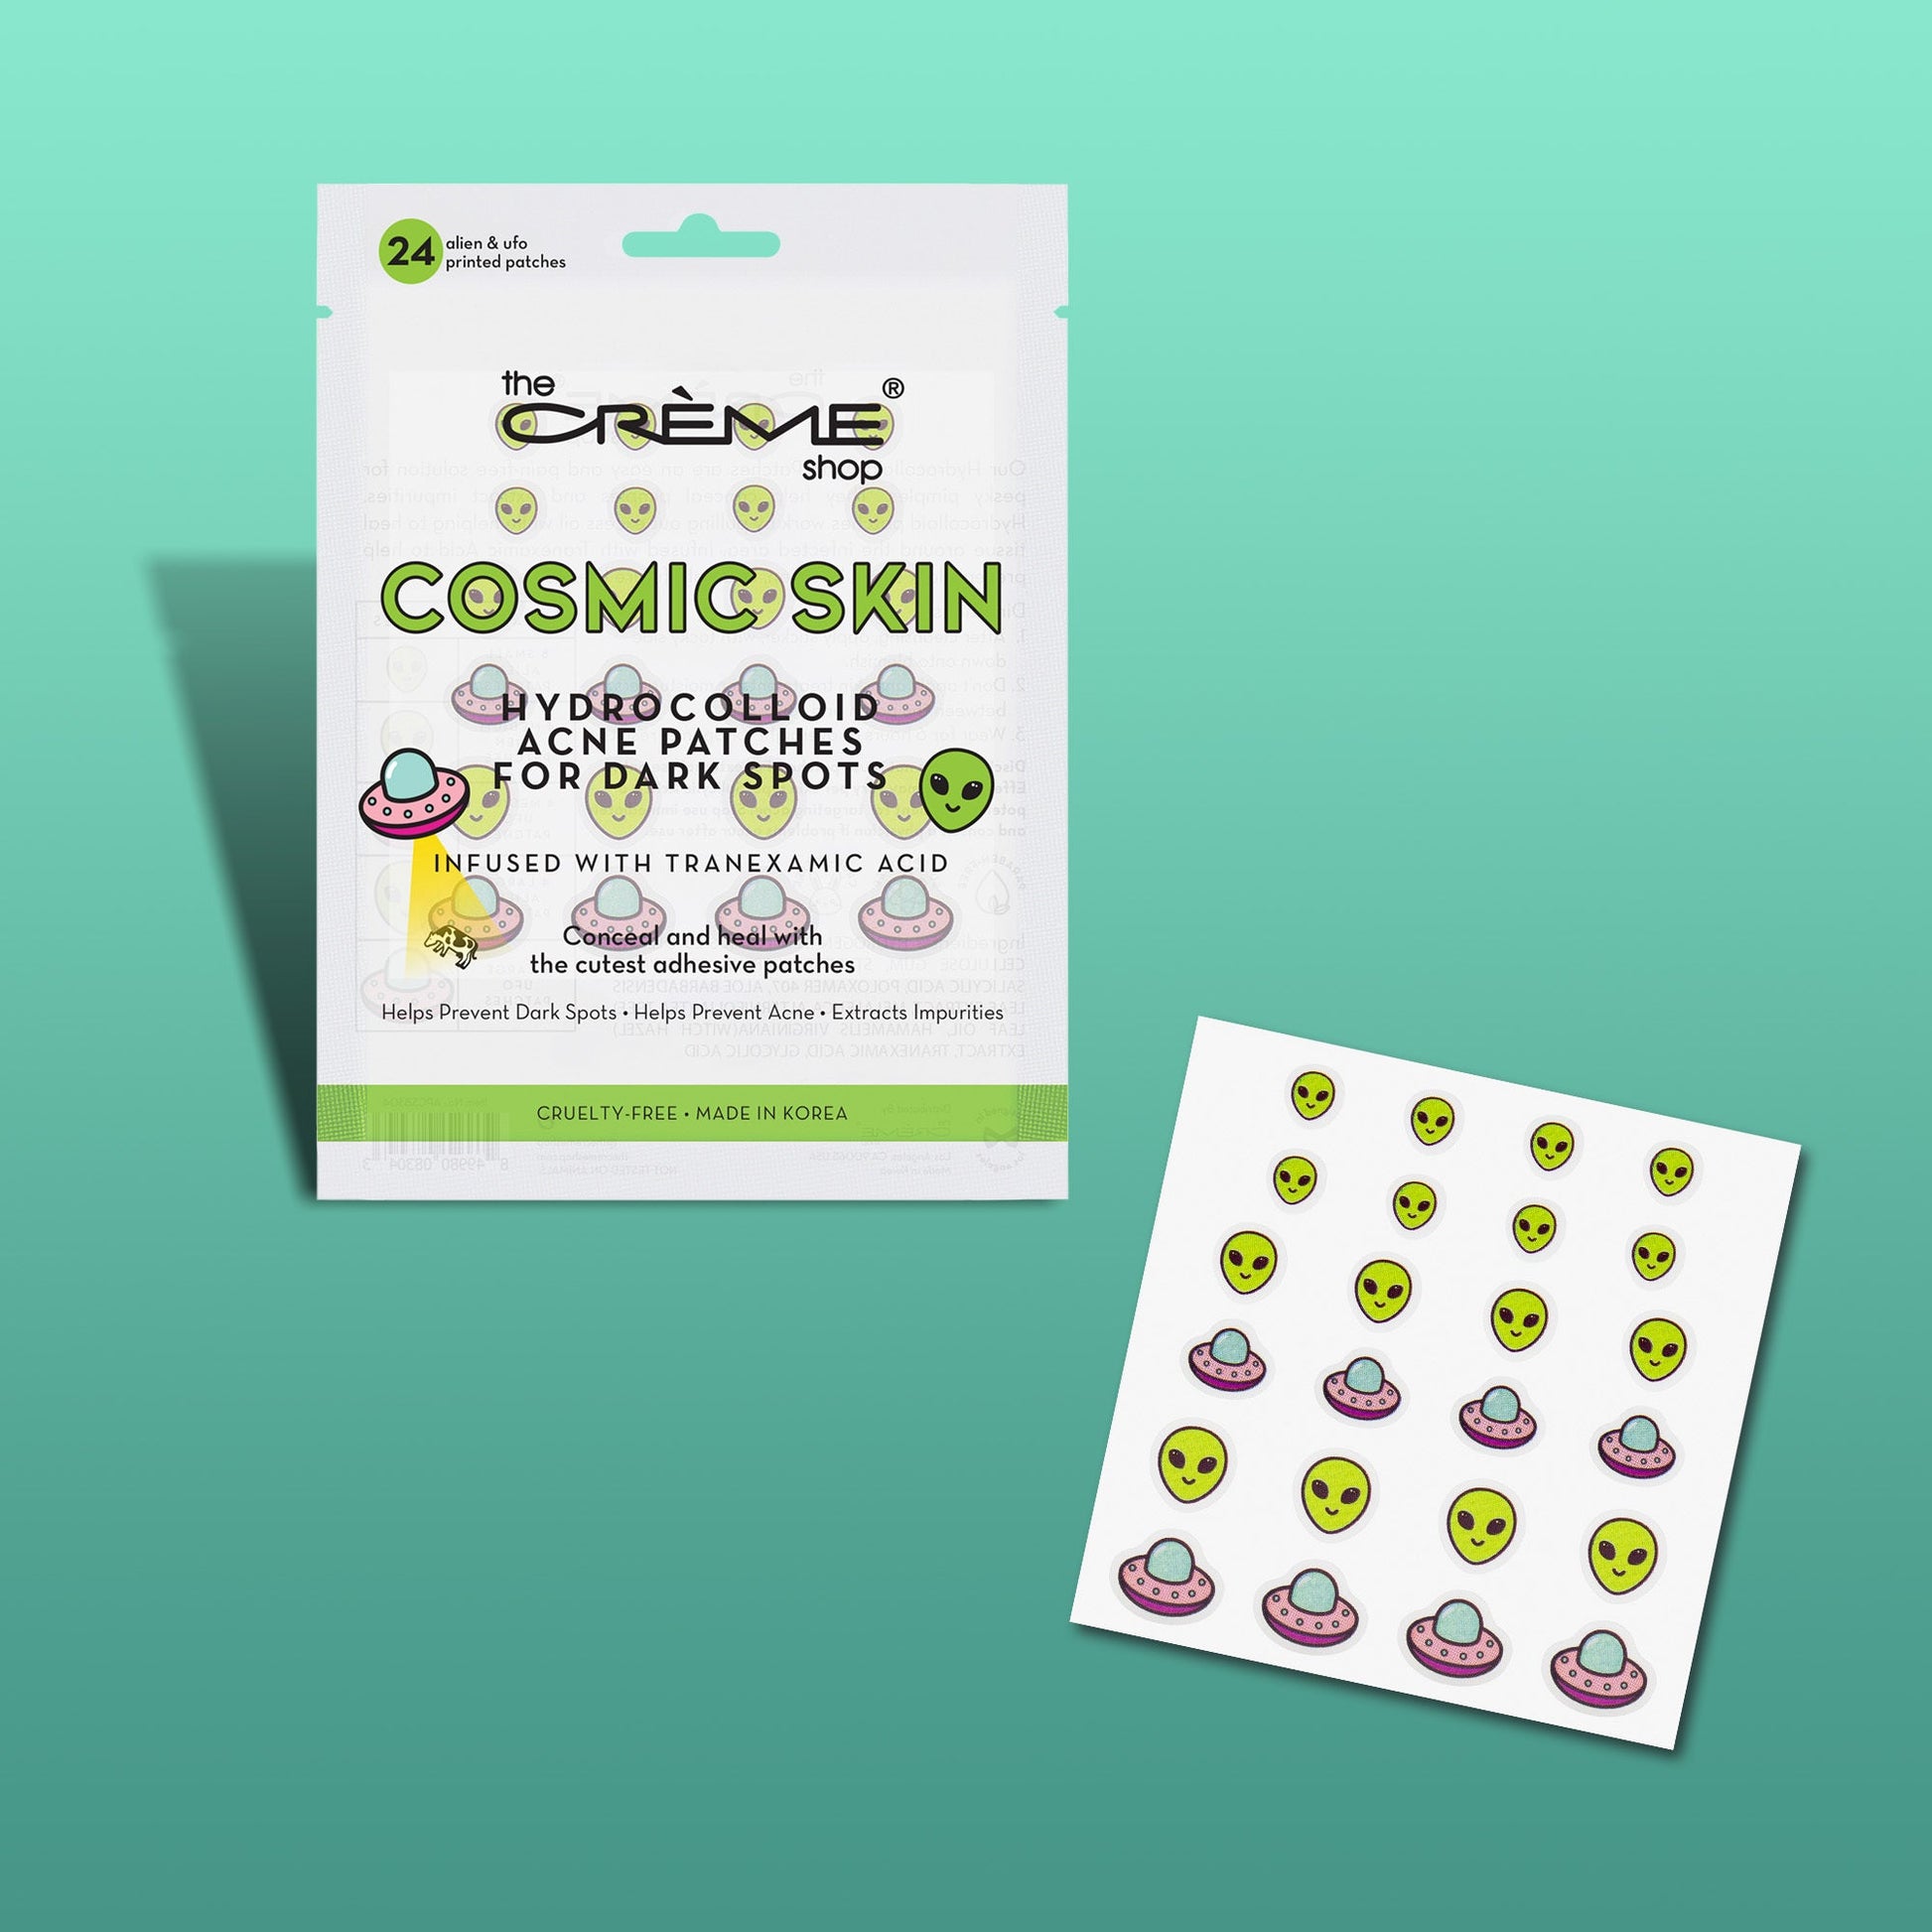 Cosmic Skin - Hydrocolloid Acne Patches | Infused with Tranexamic Acid Hydrocolloid Acne Patches The Crème Shop 3 Pack (Save $3.00) 